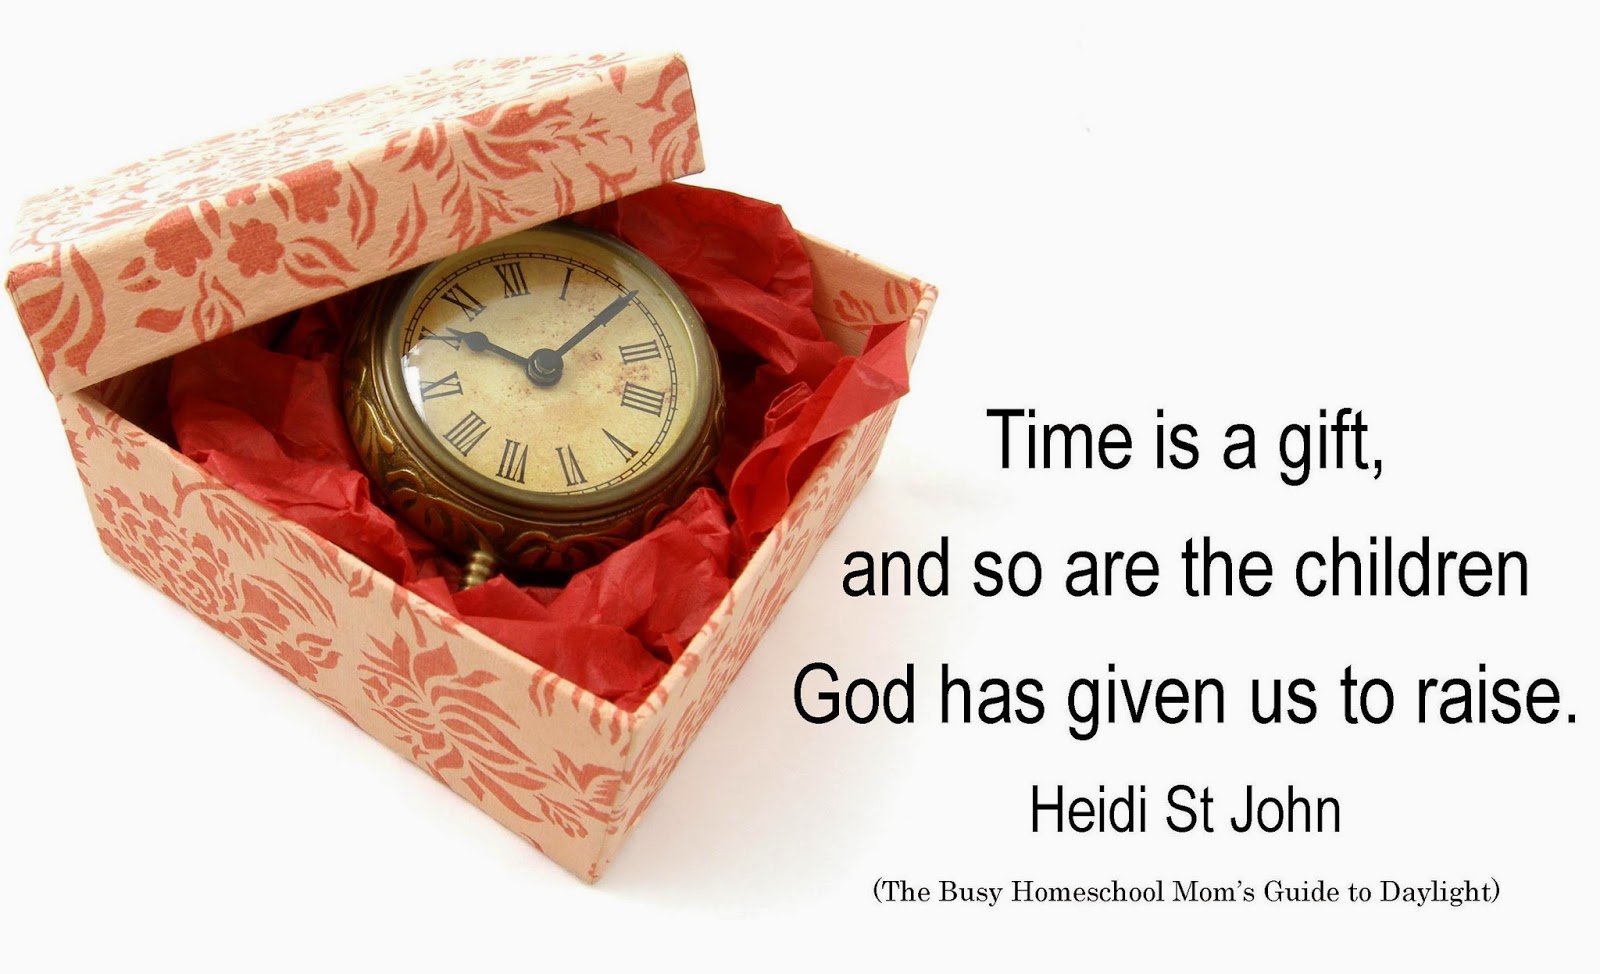 Time is a gift and so are the children God has given us to raise Heidi St John